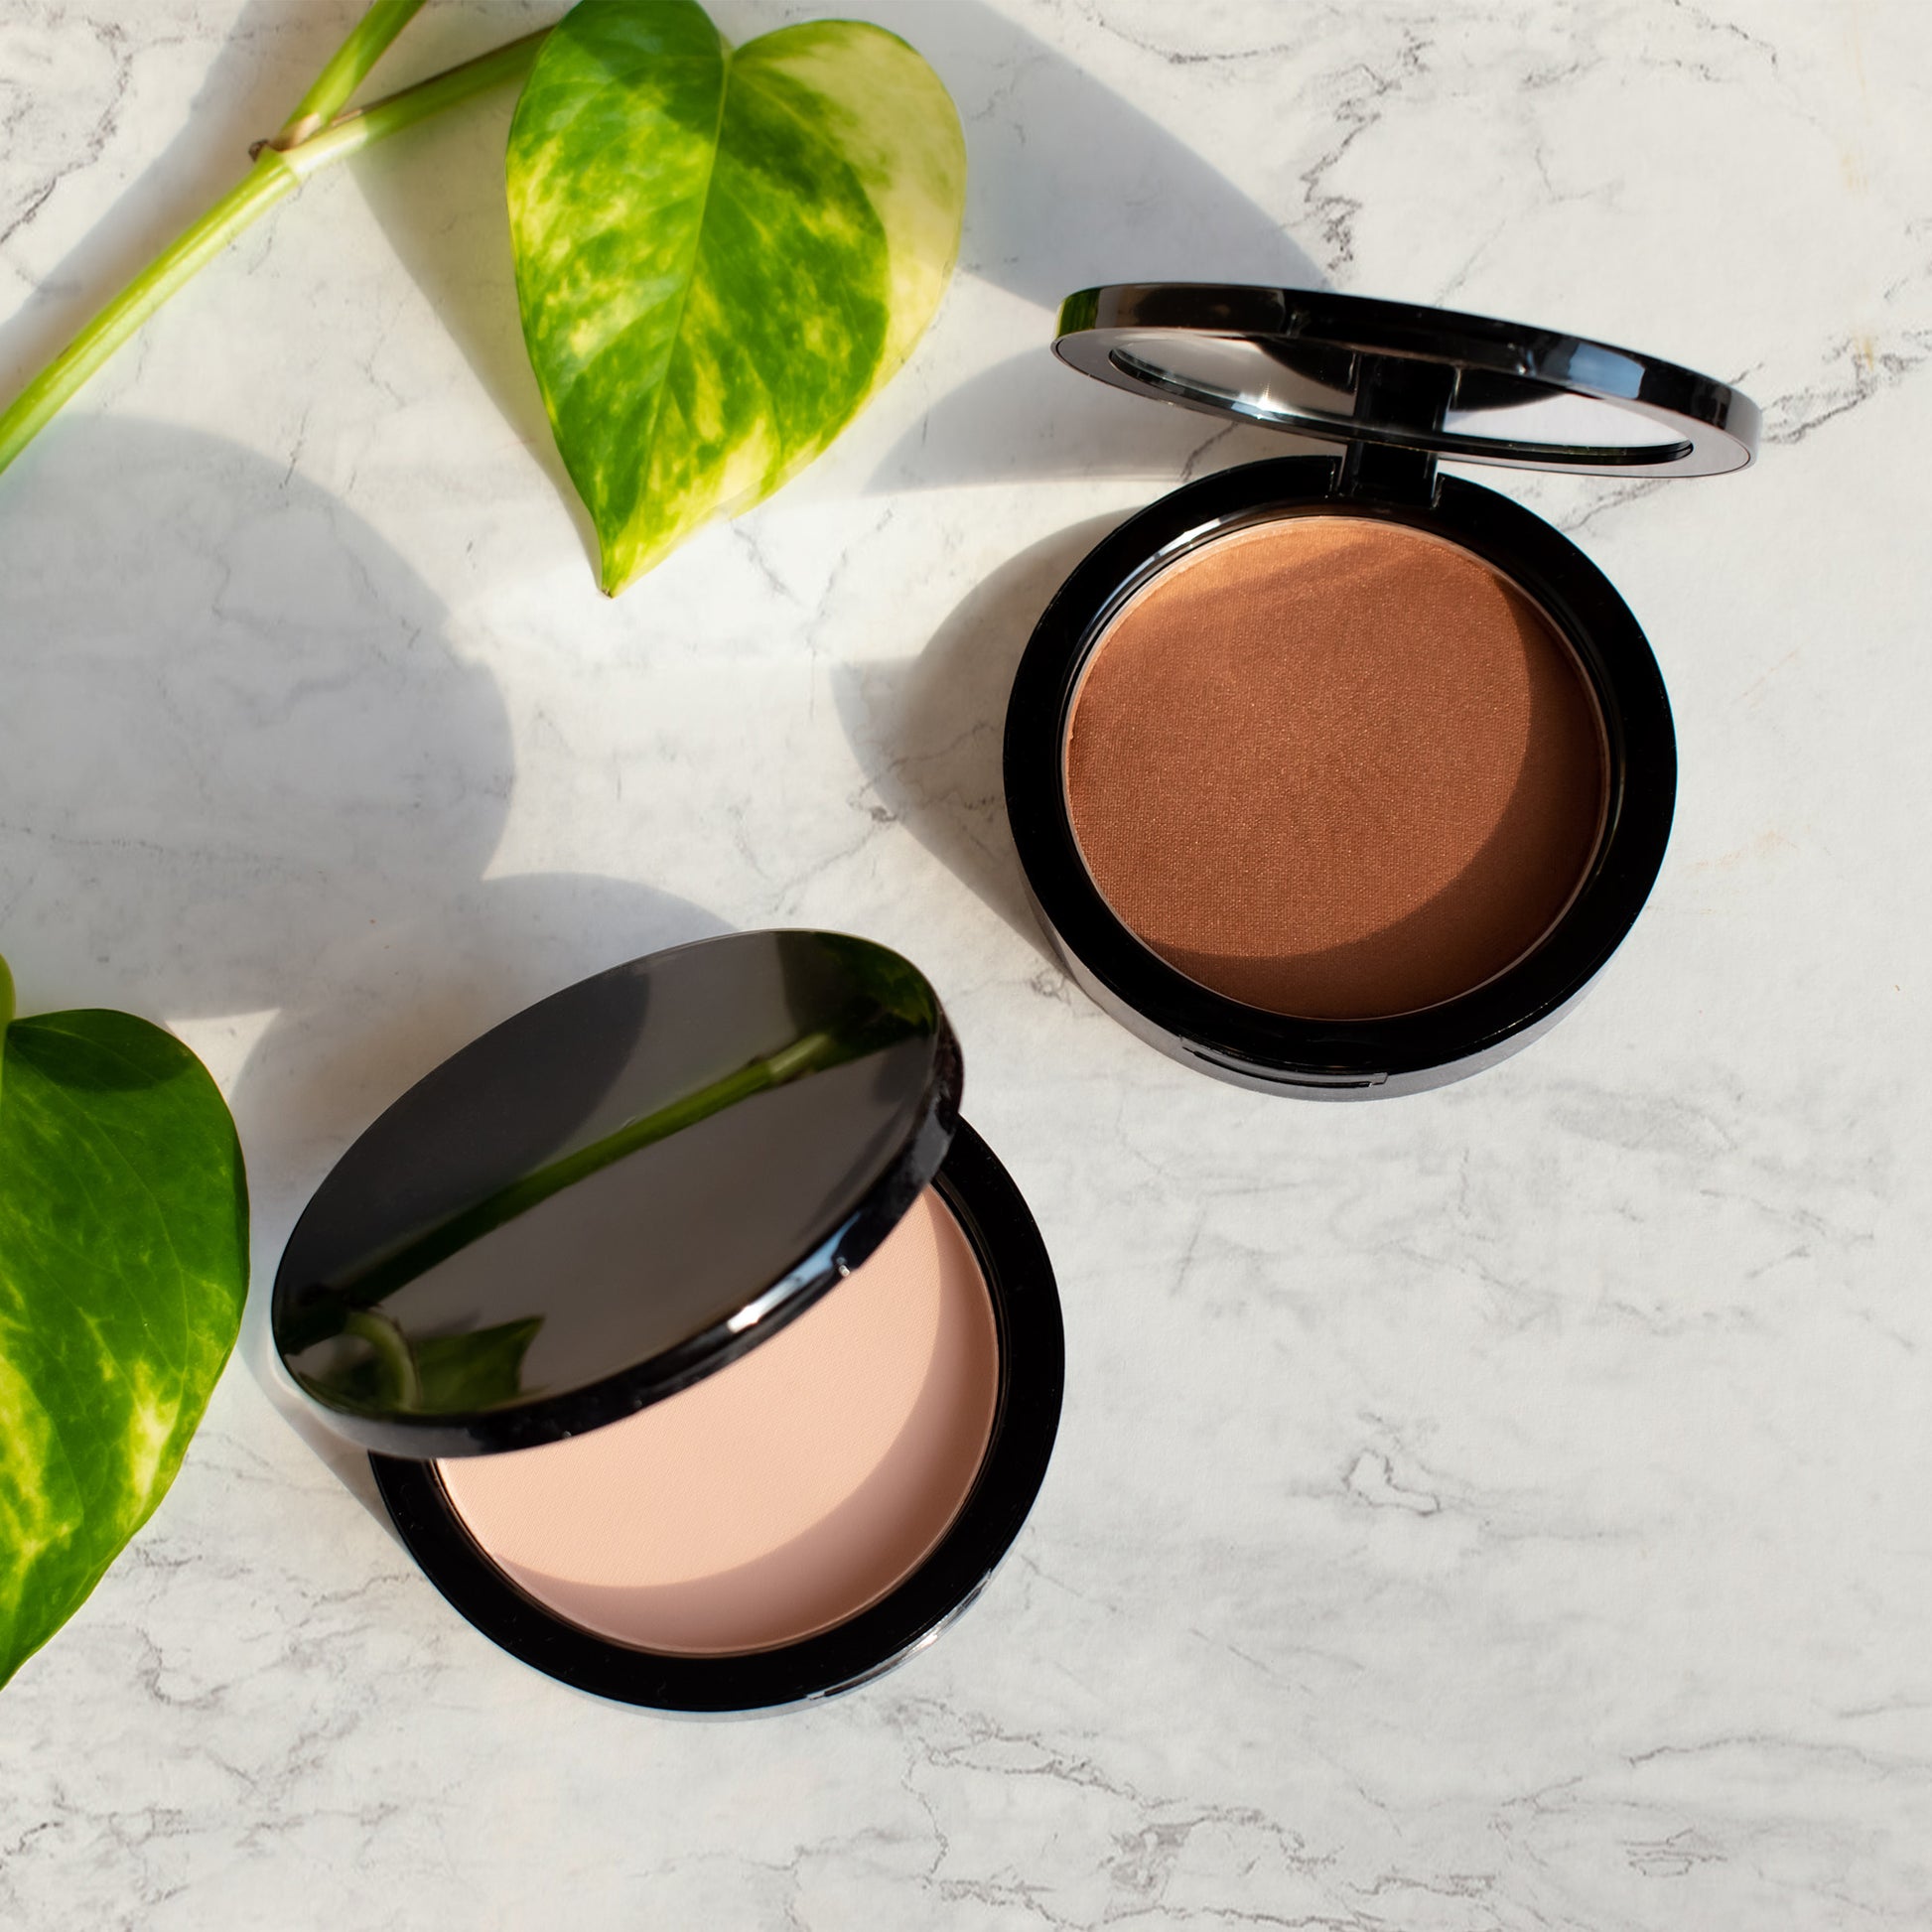 matte coverage with Cruisin Organics French Dual Blend Powder Foundation. Use it dry or wet, and easily touch up on the go. Easily applicable for all skin types